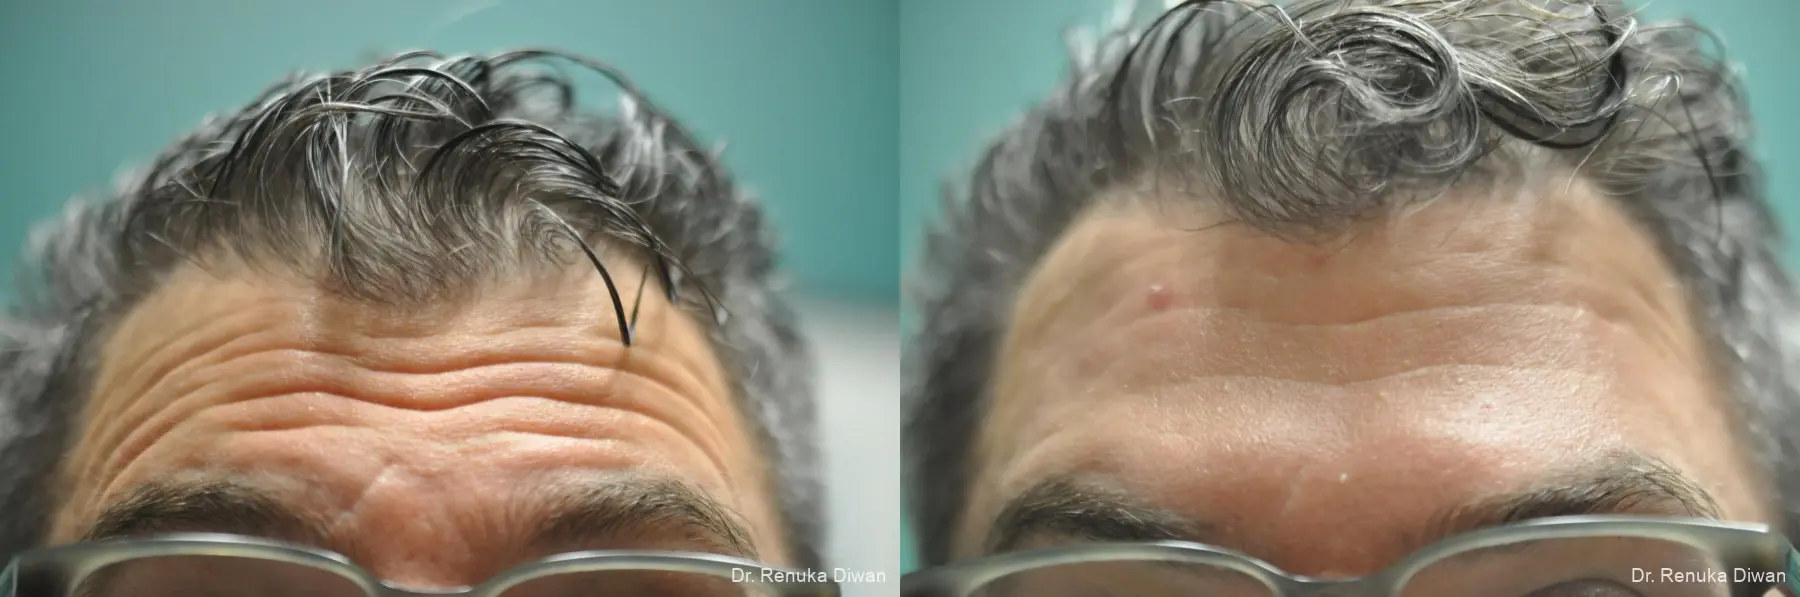 Botox Cosmetic For Men: Patient 7 - Before and After 2